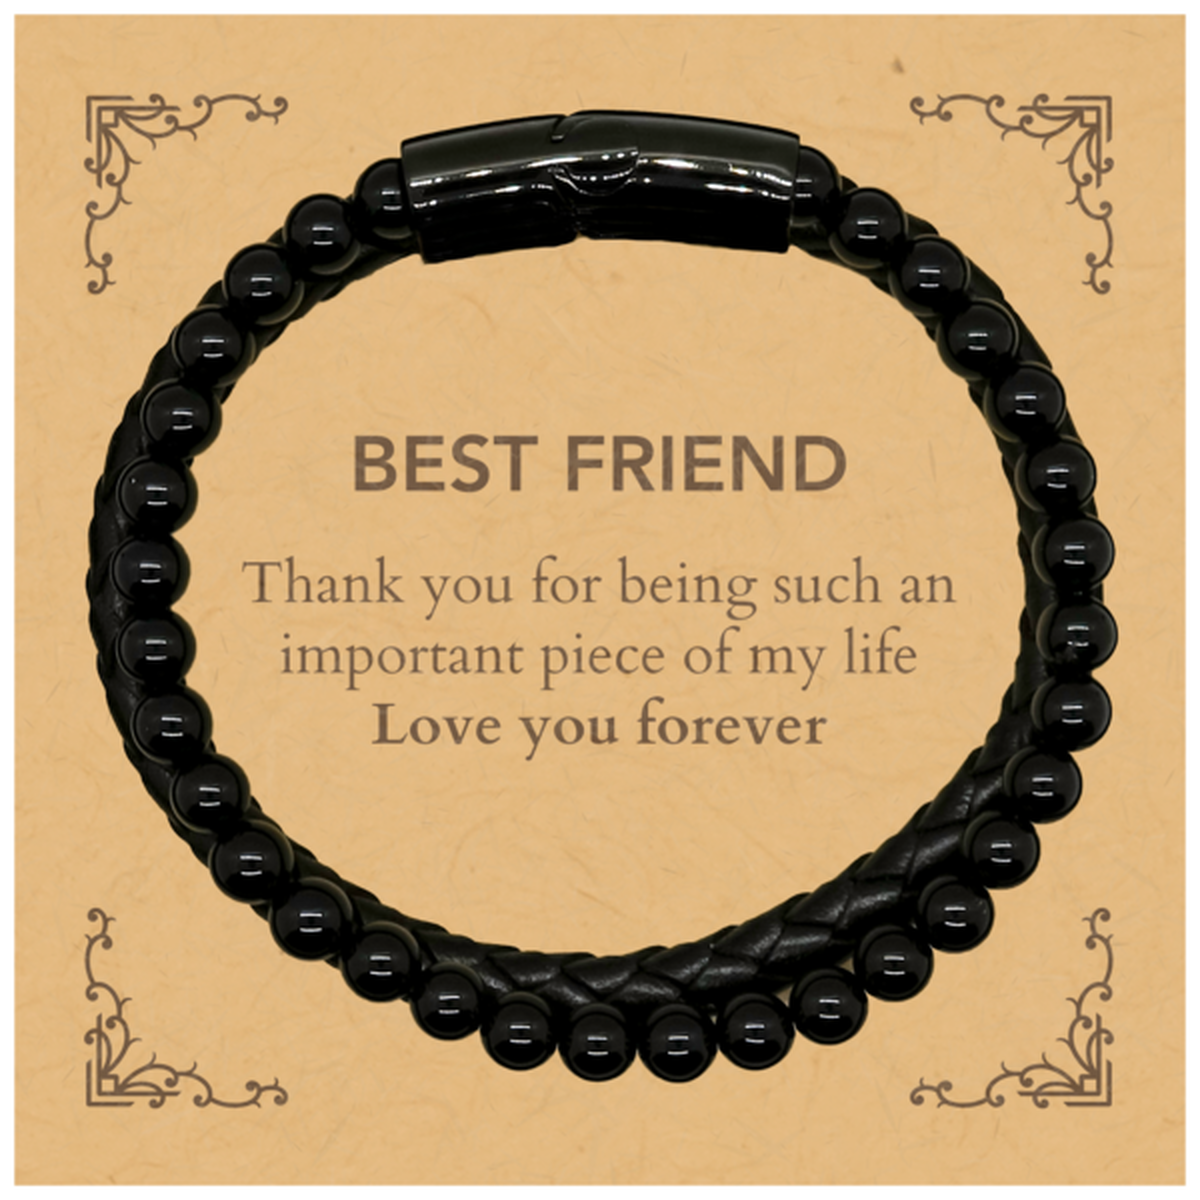 Appropriate Best Friend Stone Leather Bracelets Epic Birthday Gifts for Best Friend Thank you for being such an important piece of my life Best Friend Christmas Mothers Fathers Day